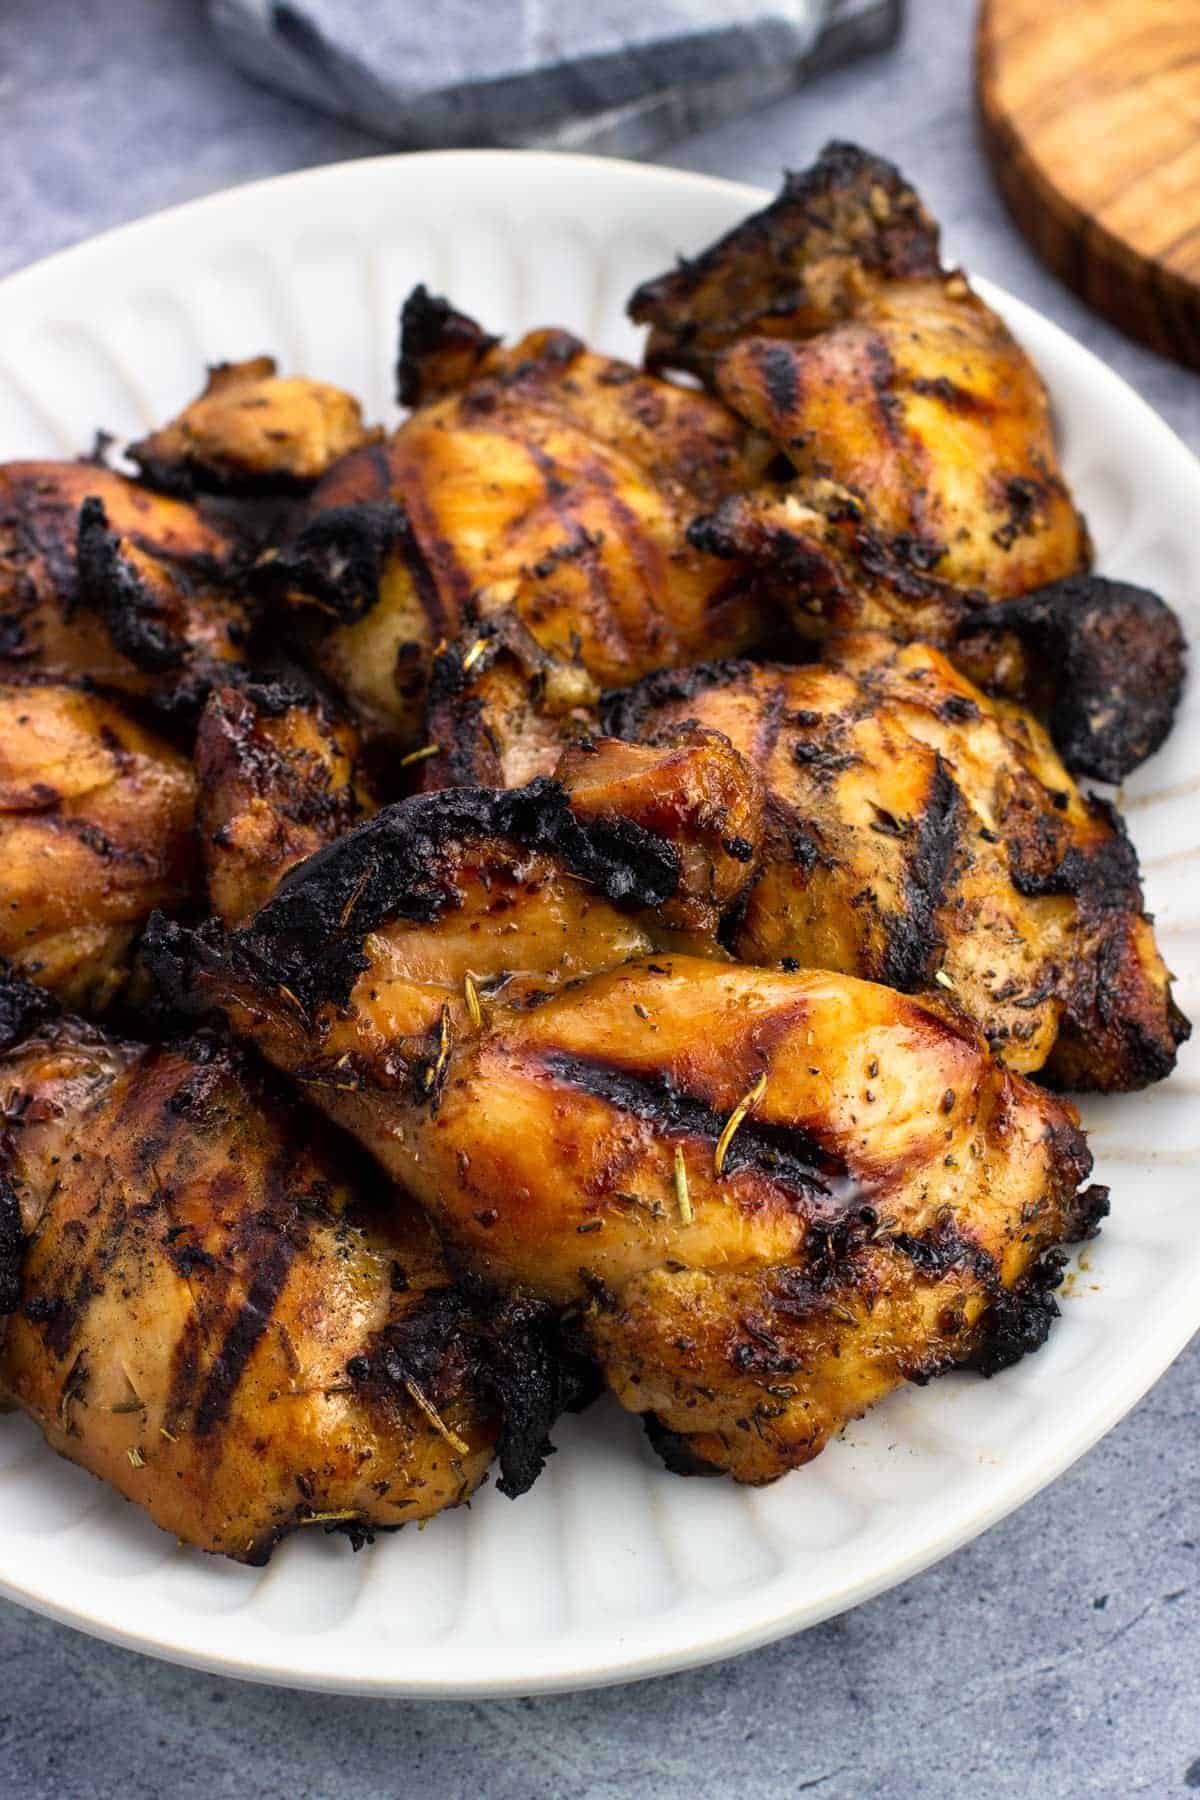 Marinated and grilled boneless skinless chicken thighs on a plate.